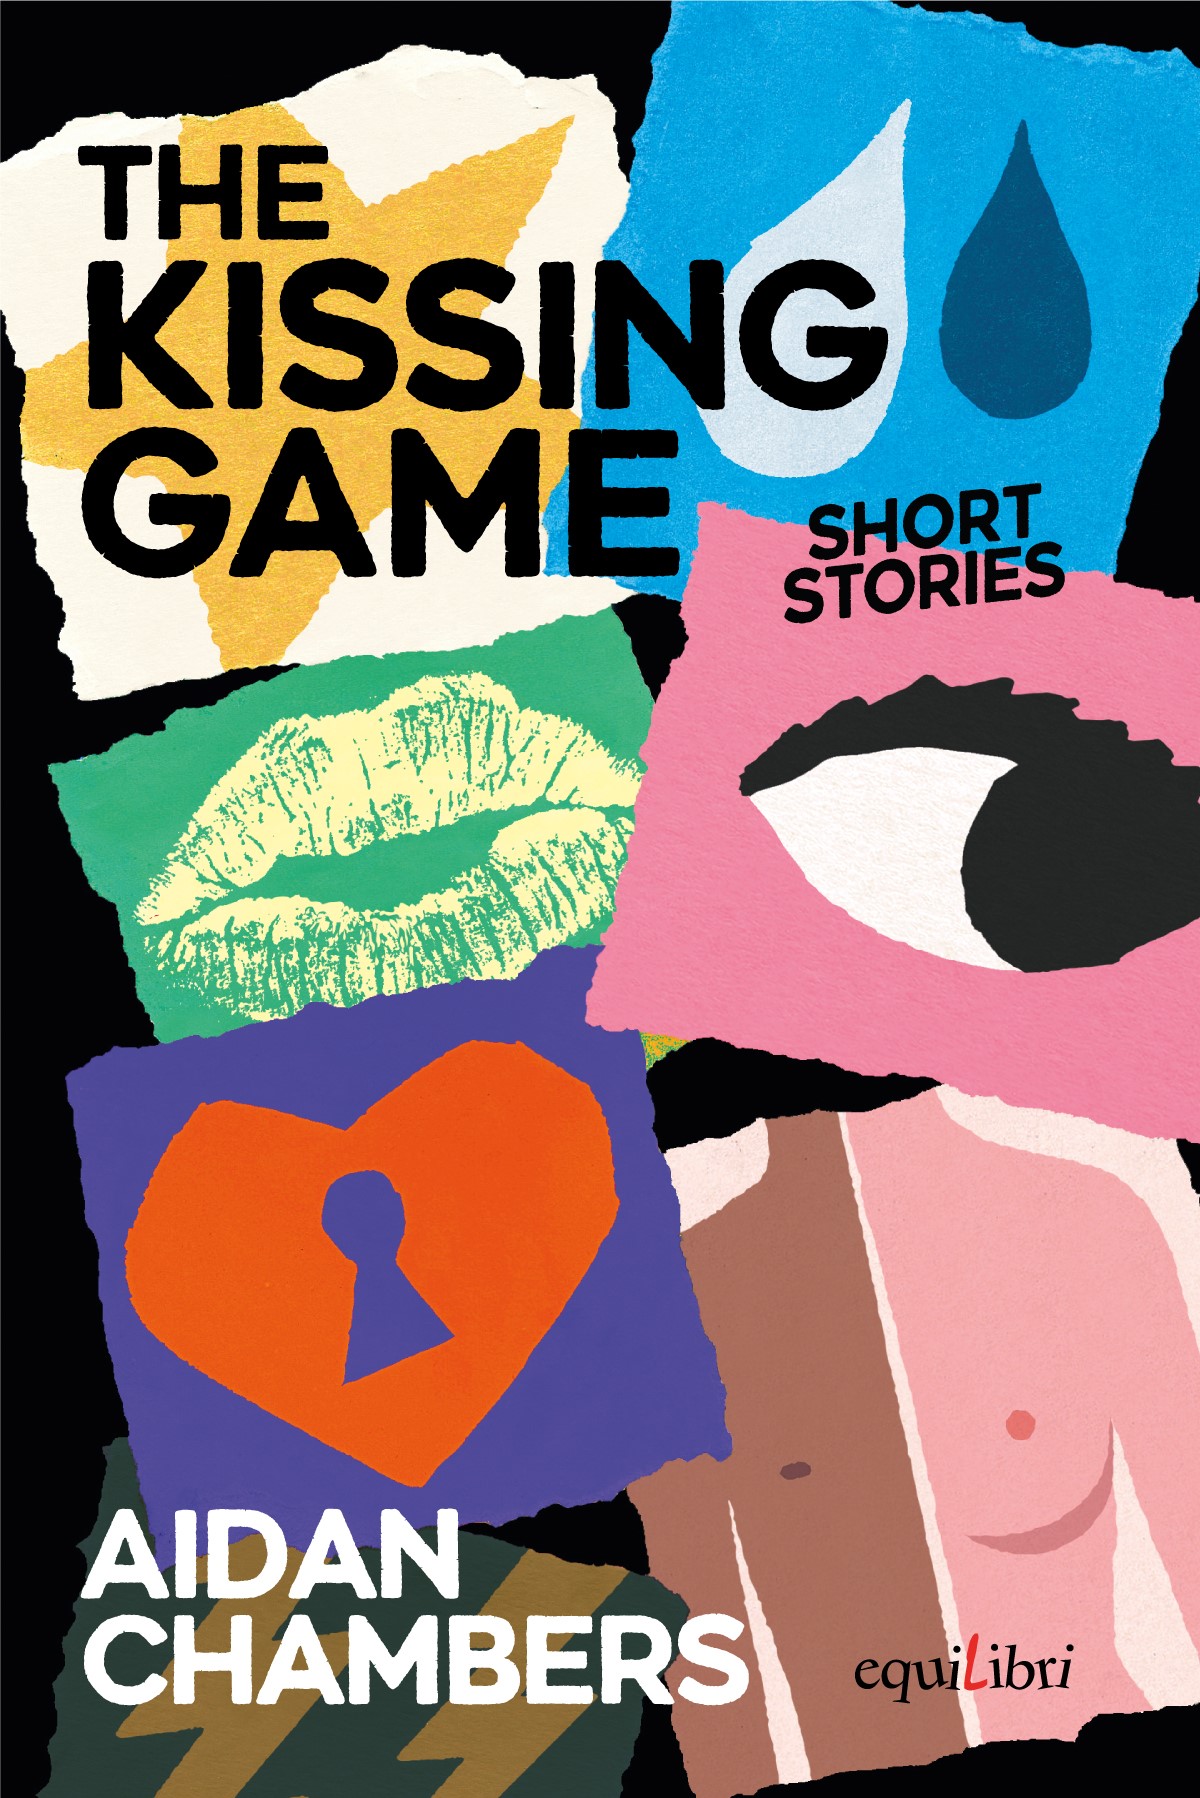 The kissing game